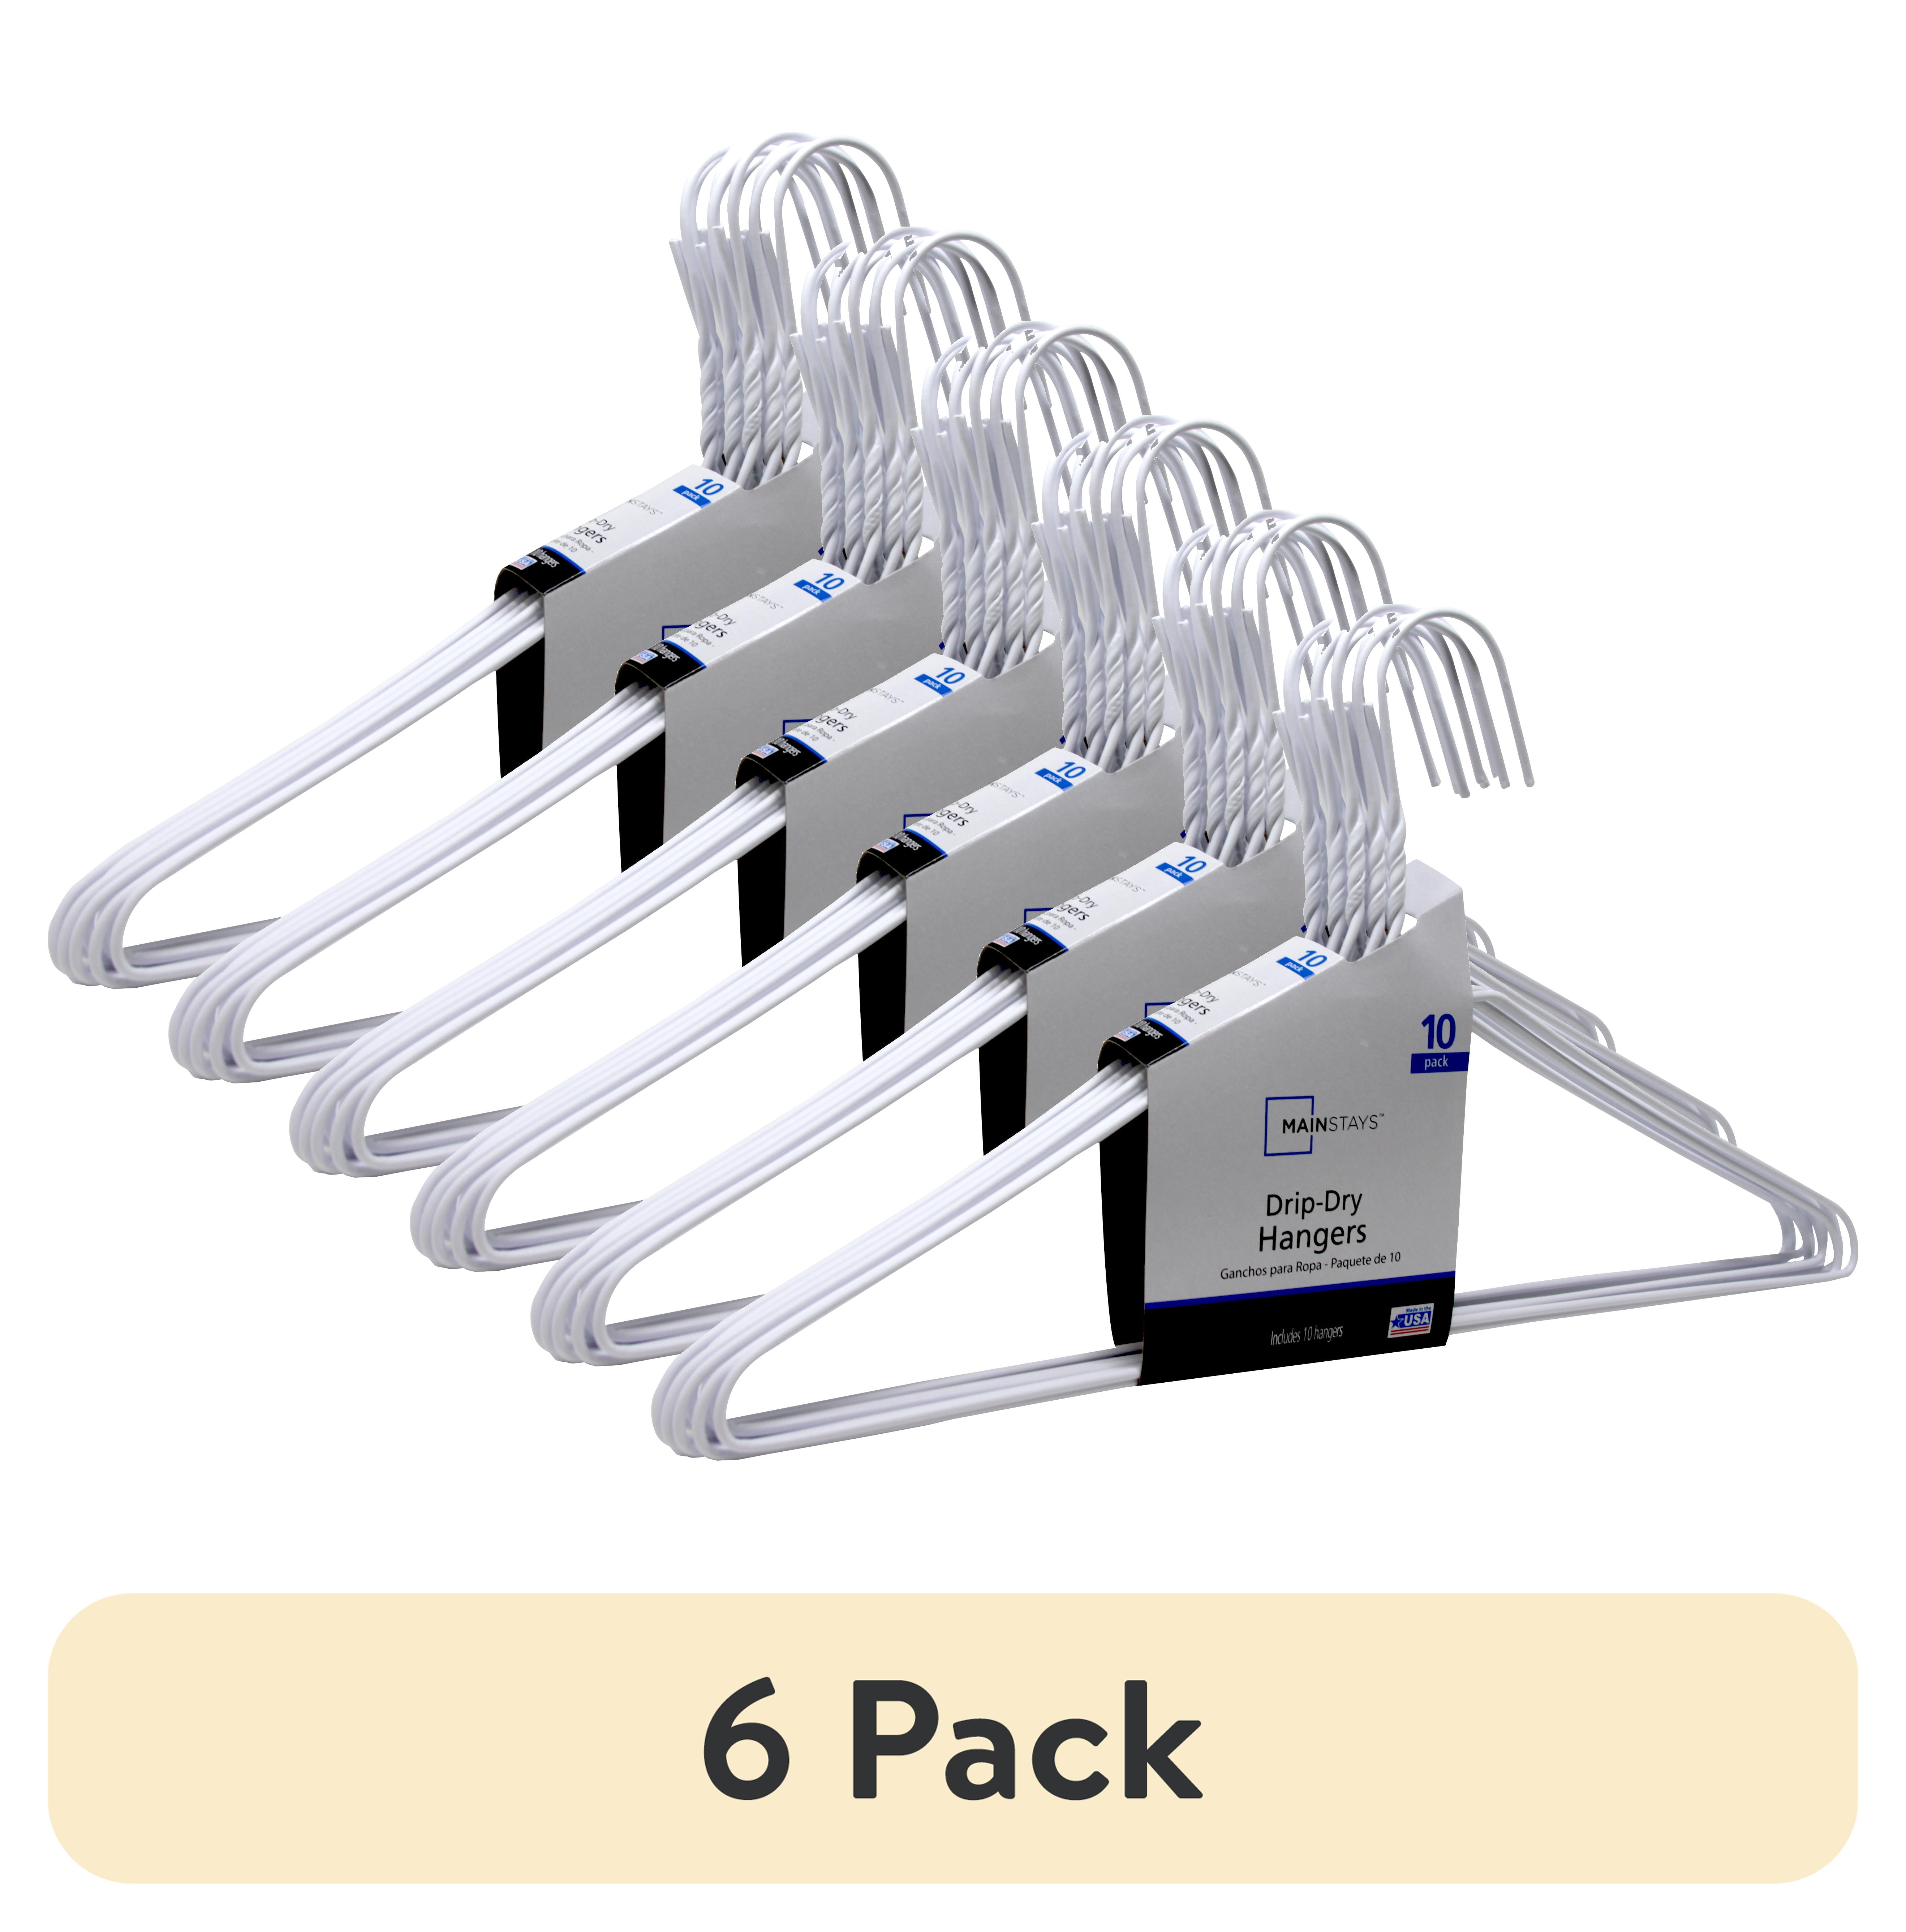 KINJOEK 50 Pack Wire Hangers for Clothes,17.7”Stainless Steel Wire Clothes Hanger 3mm Thick Coat Closet Hangers for Dry and Wet Clothes, Underwear